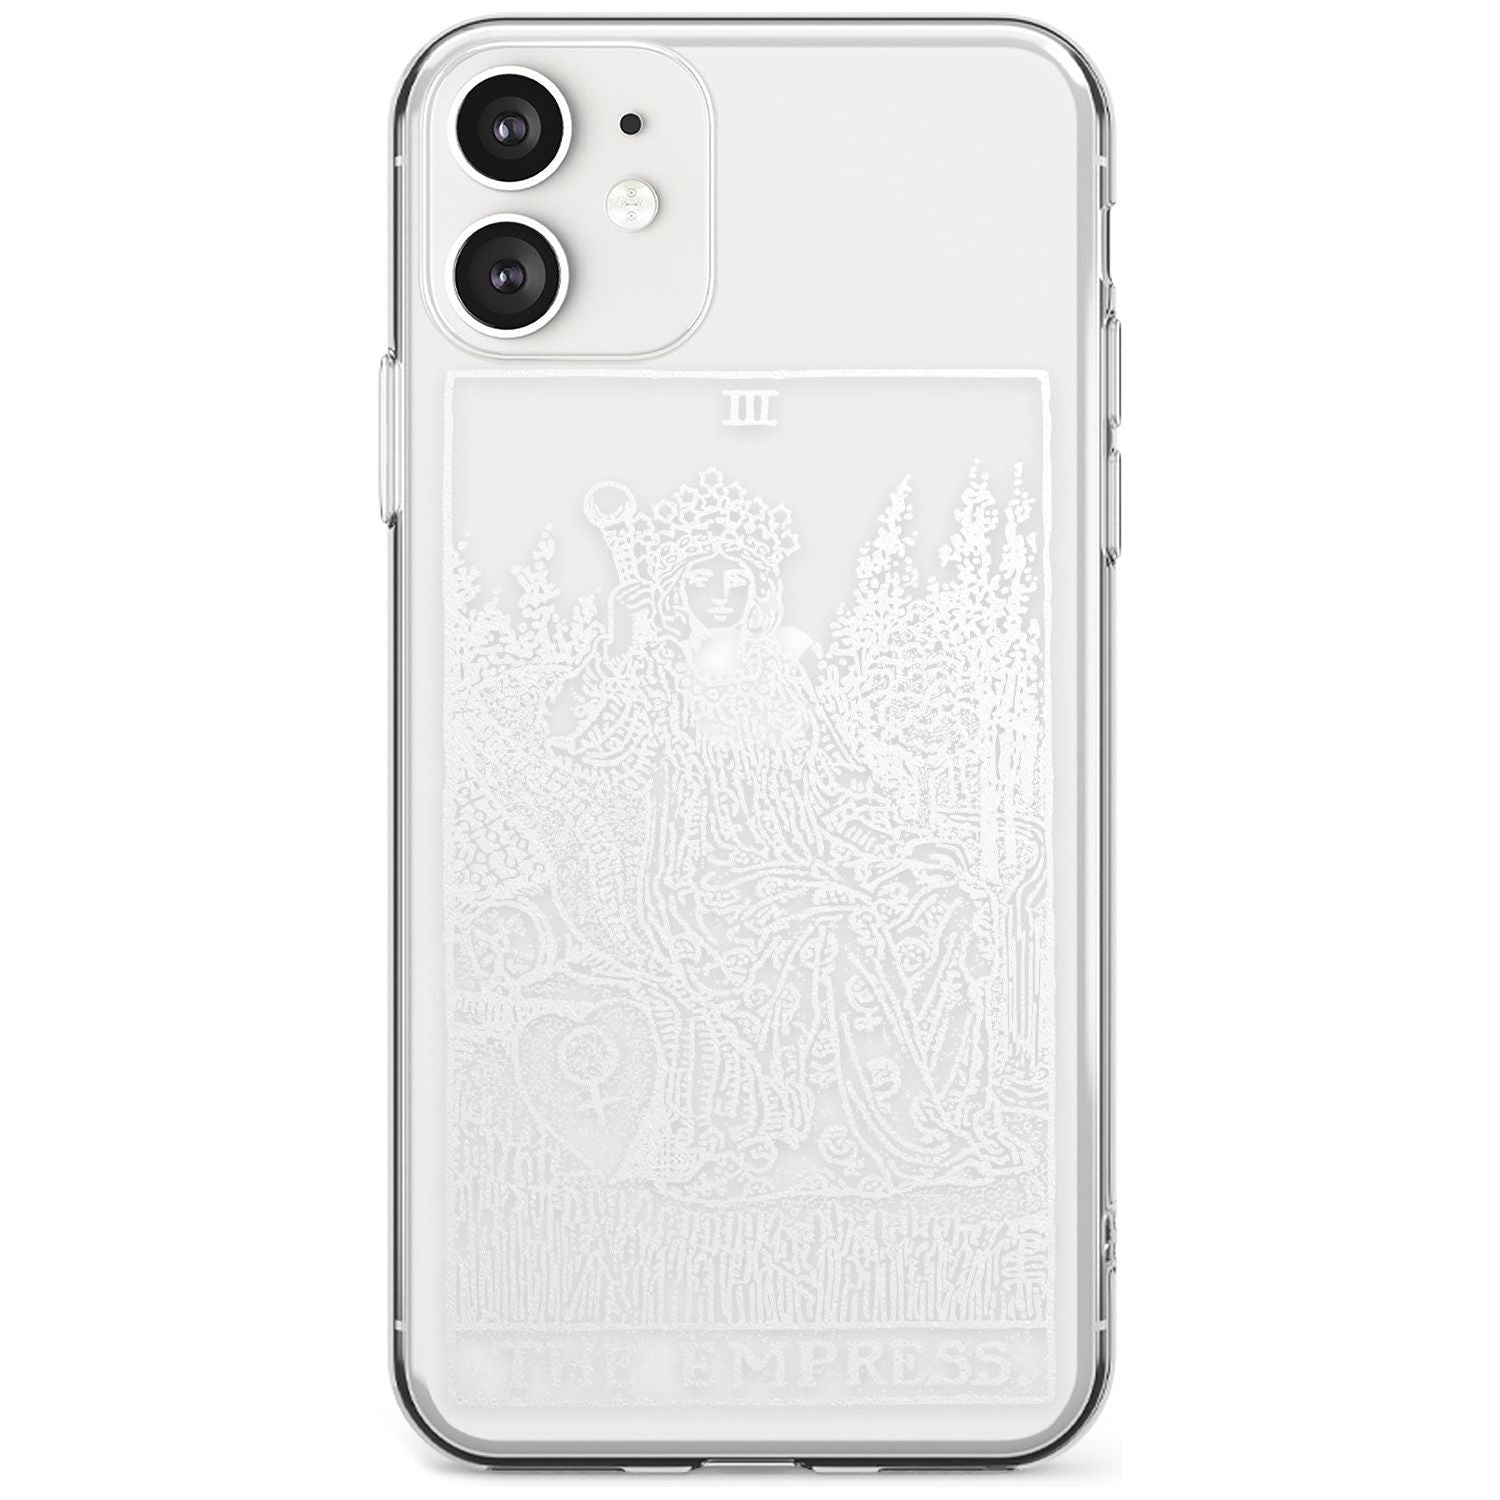 The Empress Tarot Card - White Transparent Black Impact Phone Case for iPhone 11